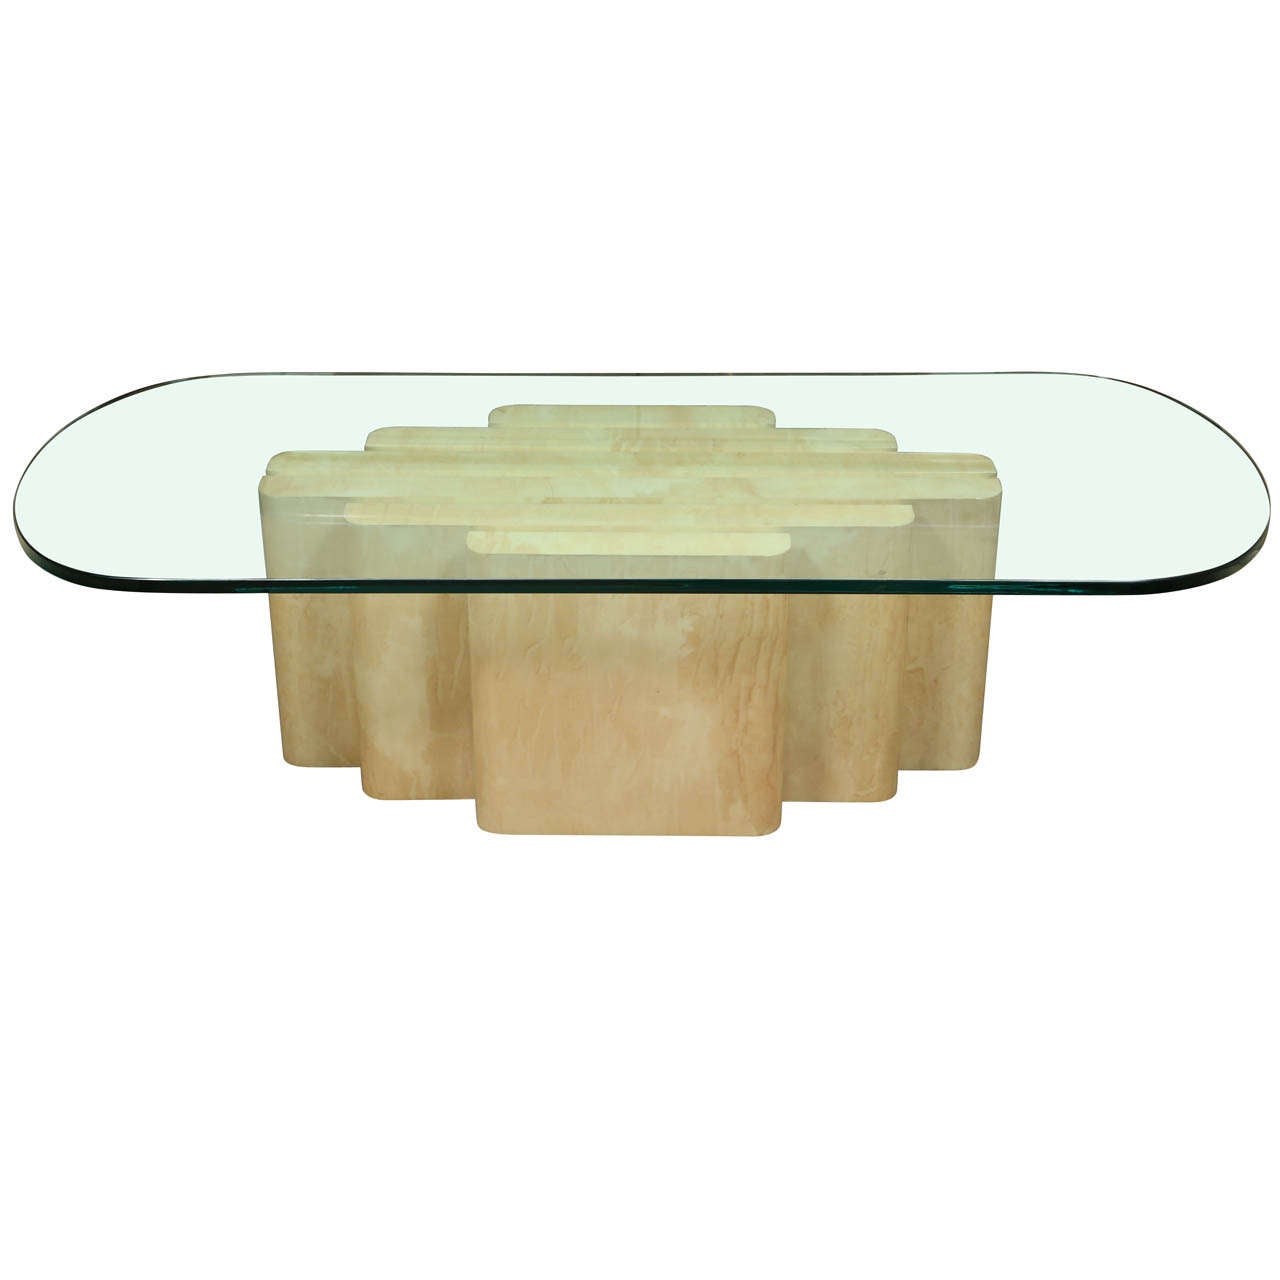 Coffee Table Finished in Lacquered Goatskin with Brass Accents by Steve Chase